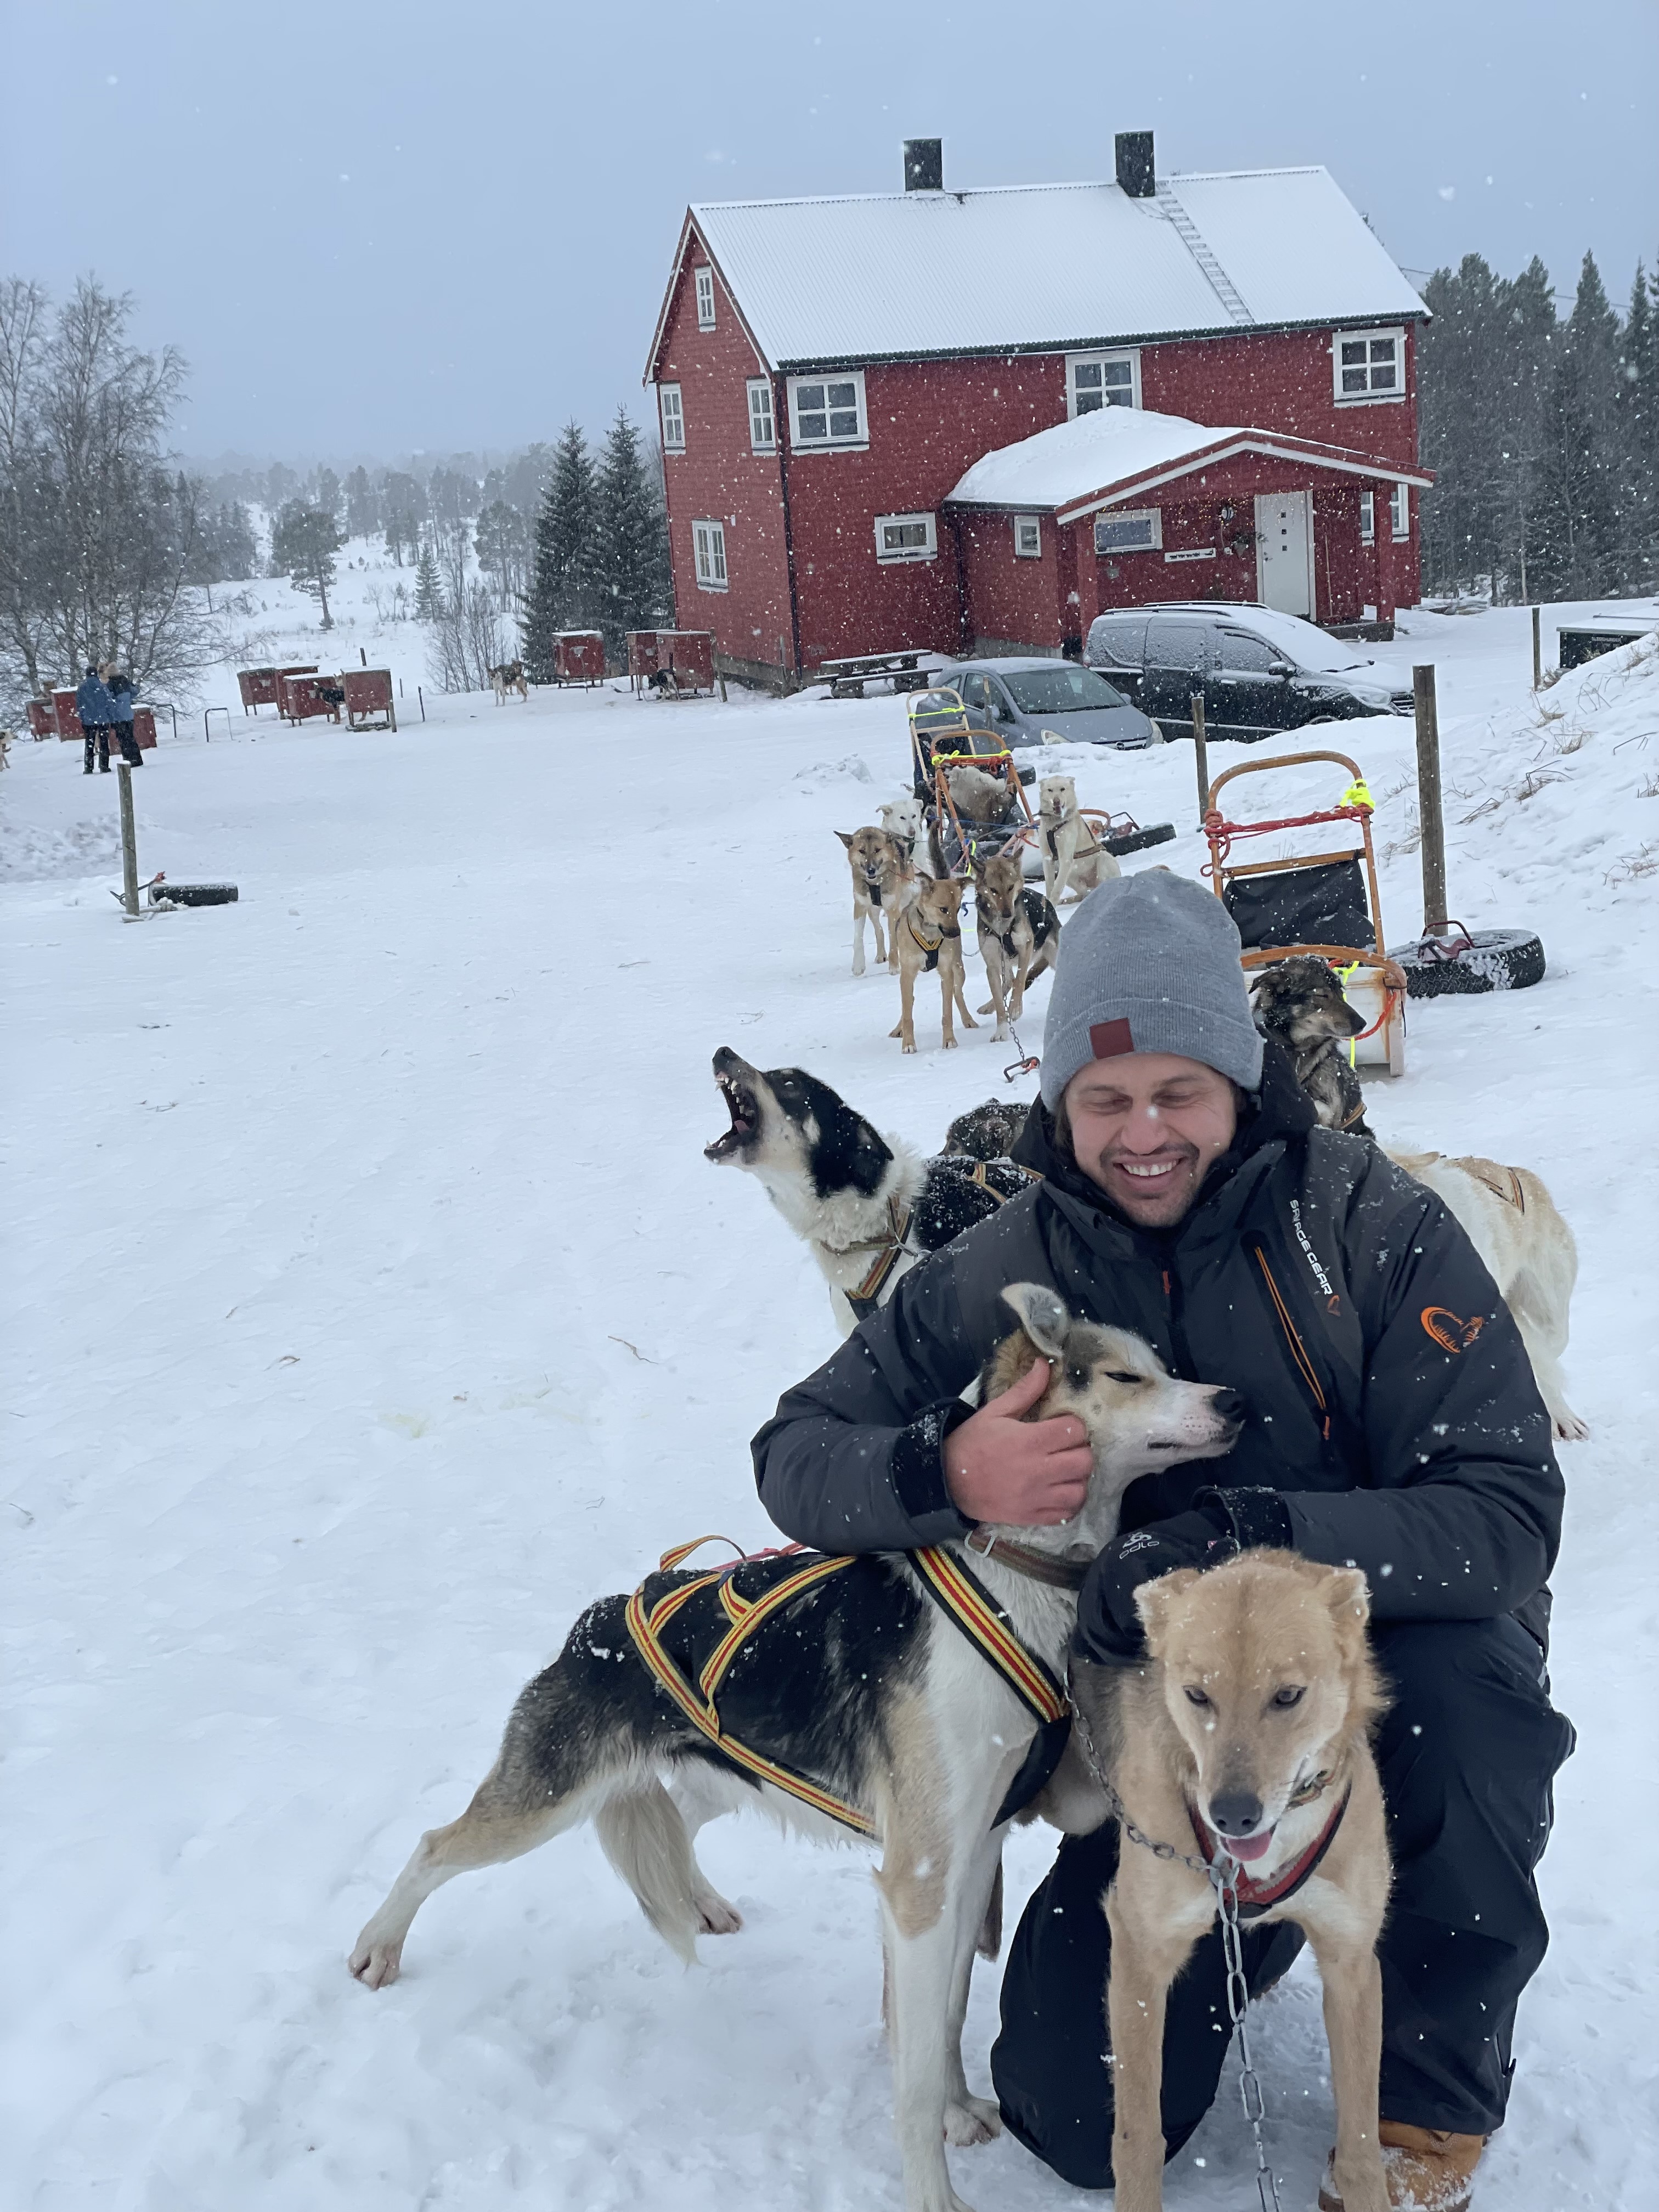 Jack Barden playing with sled dogs in Norway.